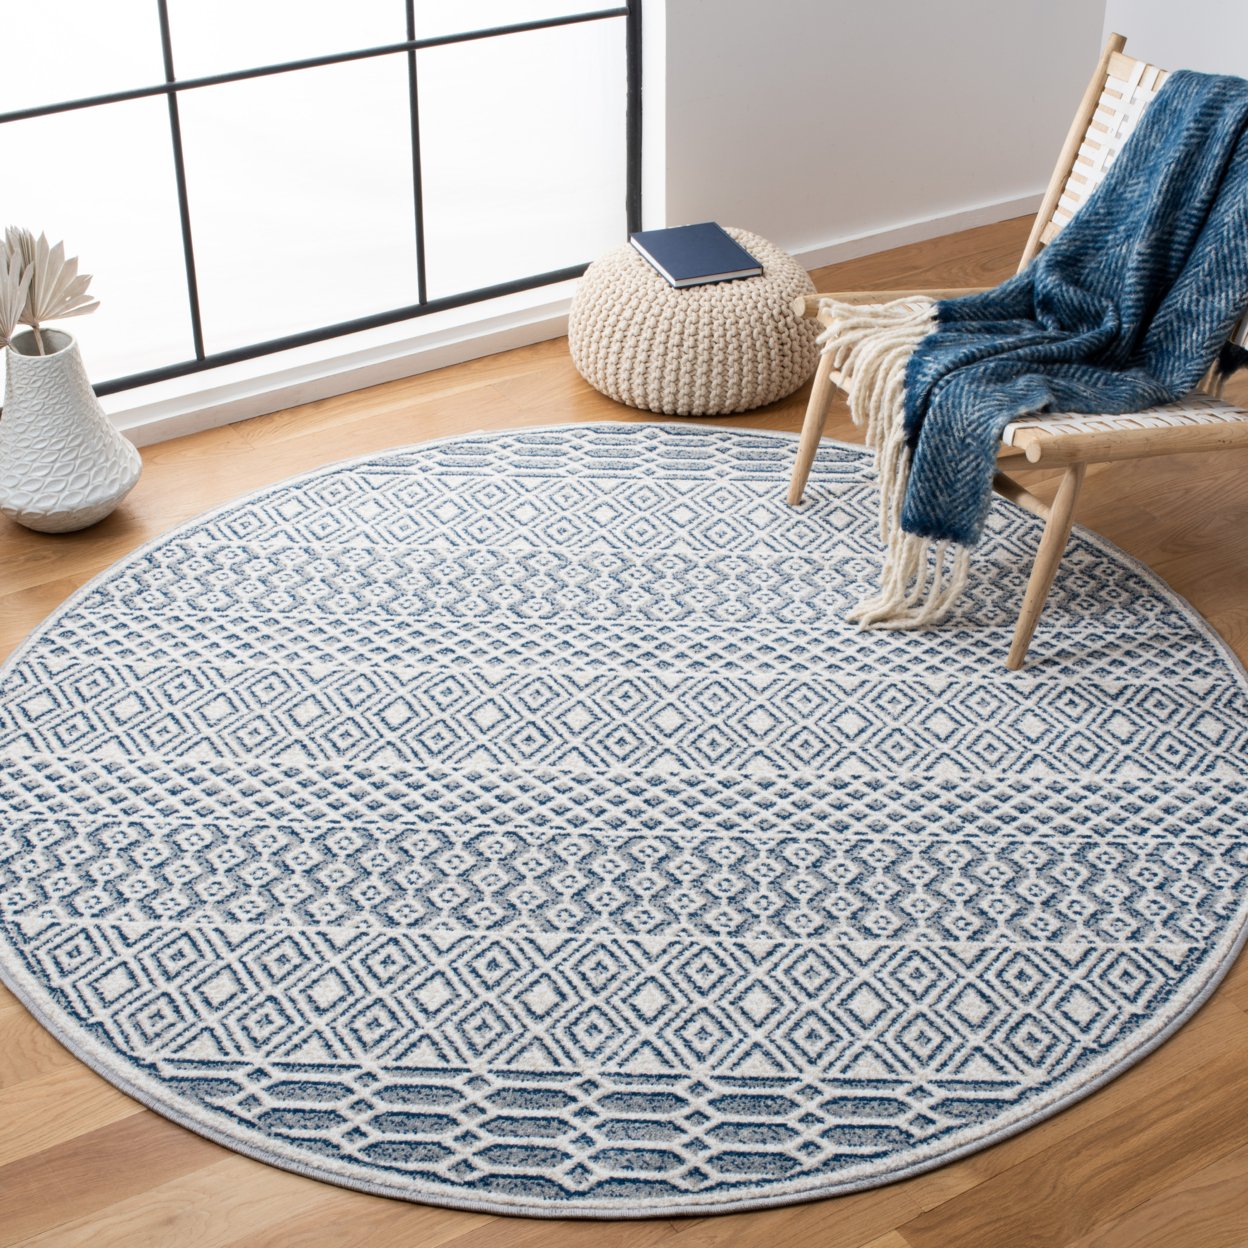 SAFAVIEH Belmont Collection BMT132B Ivory / Navy Rug - 6-7 X 6-7 Square